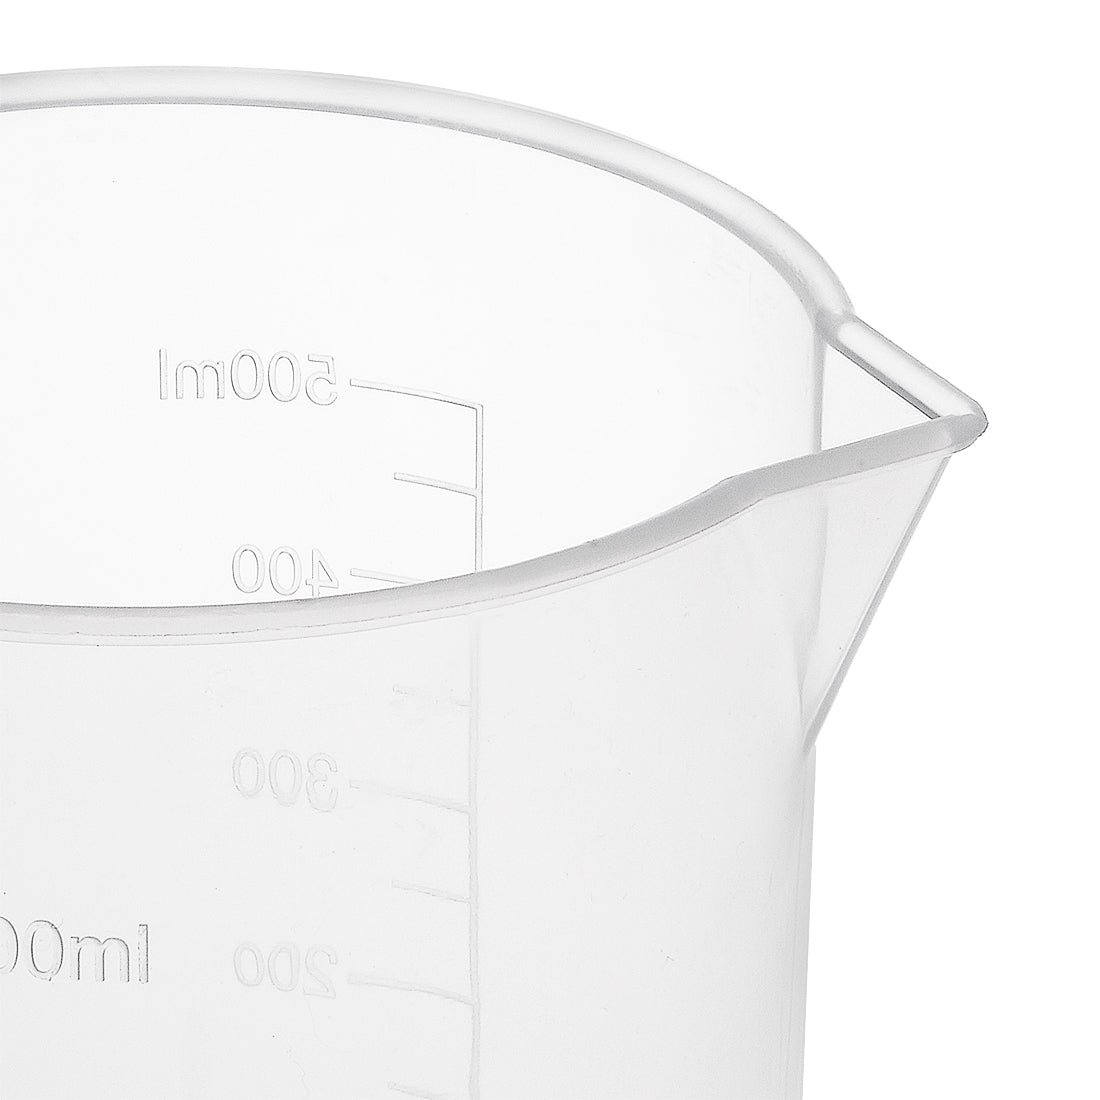 uxcell Uxcell Laboratory Clear White PP Measuring Cup Handled Beaker 500mL 1000mL Set of 2